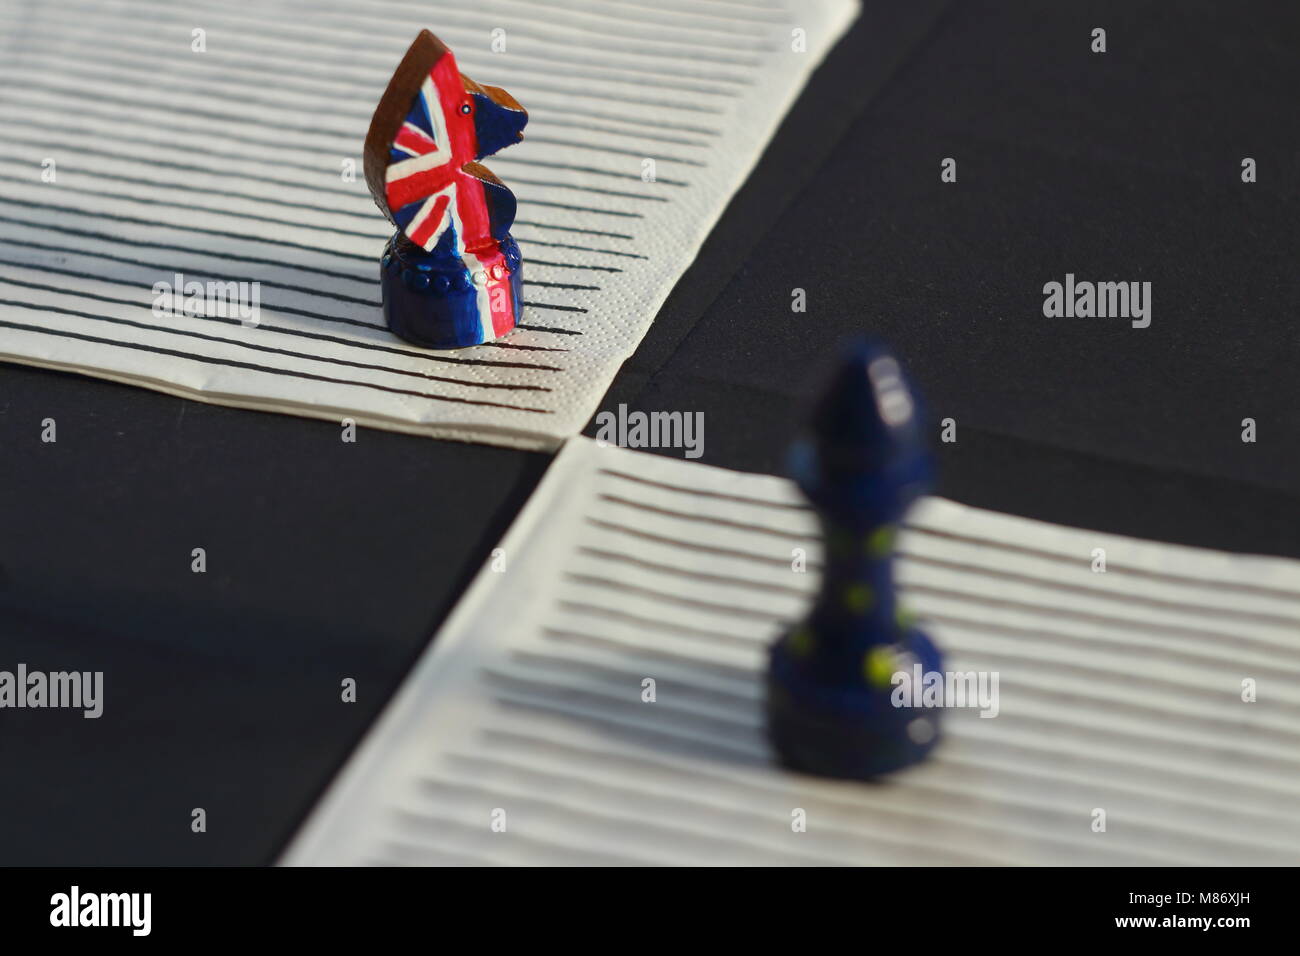 chess game confrontation of United Europe and Britain Stock Photo